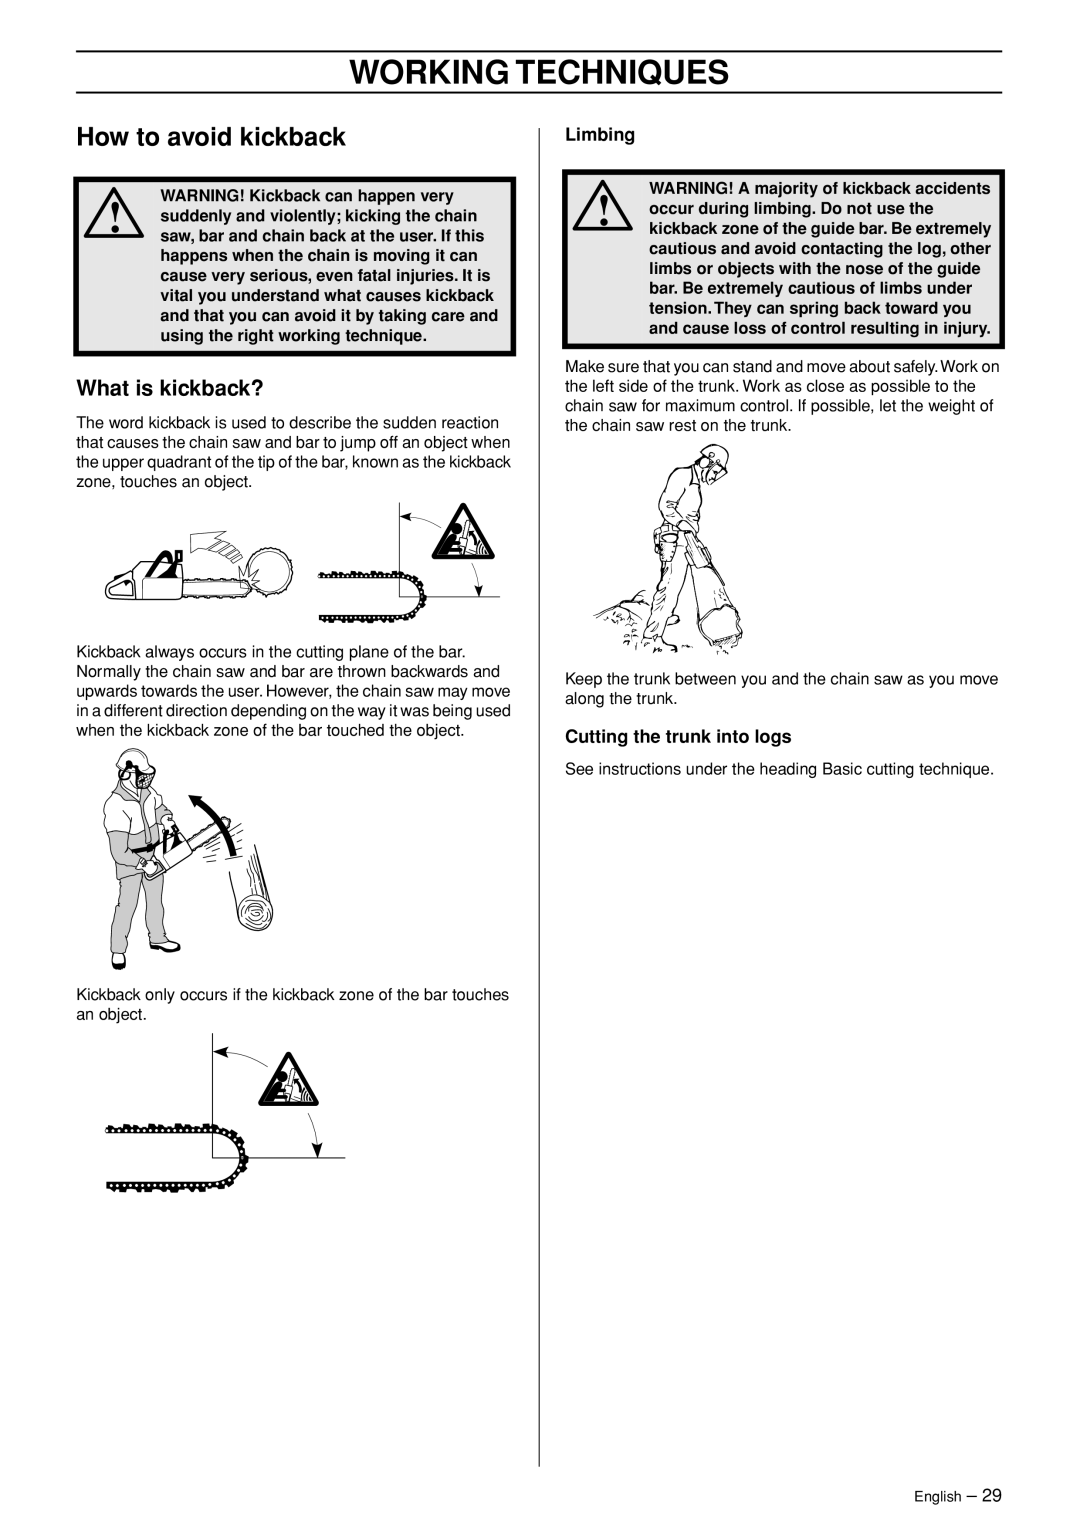 Jonsered CS 2255 manual How to avoid kickback, What is kickback?, Cutting the trunk into logs, Working Techniques, Limbing 